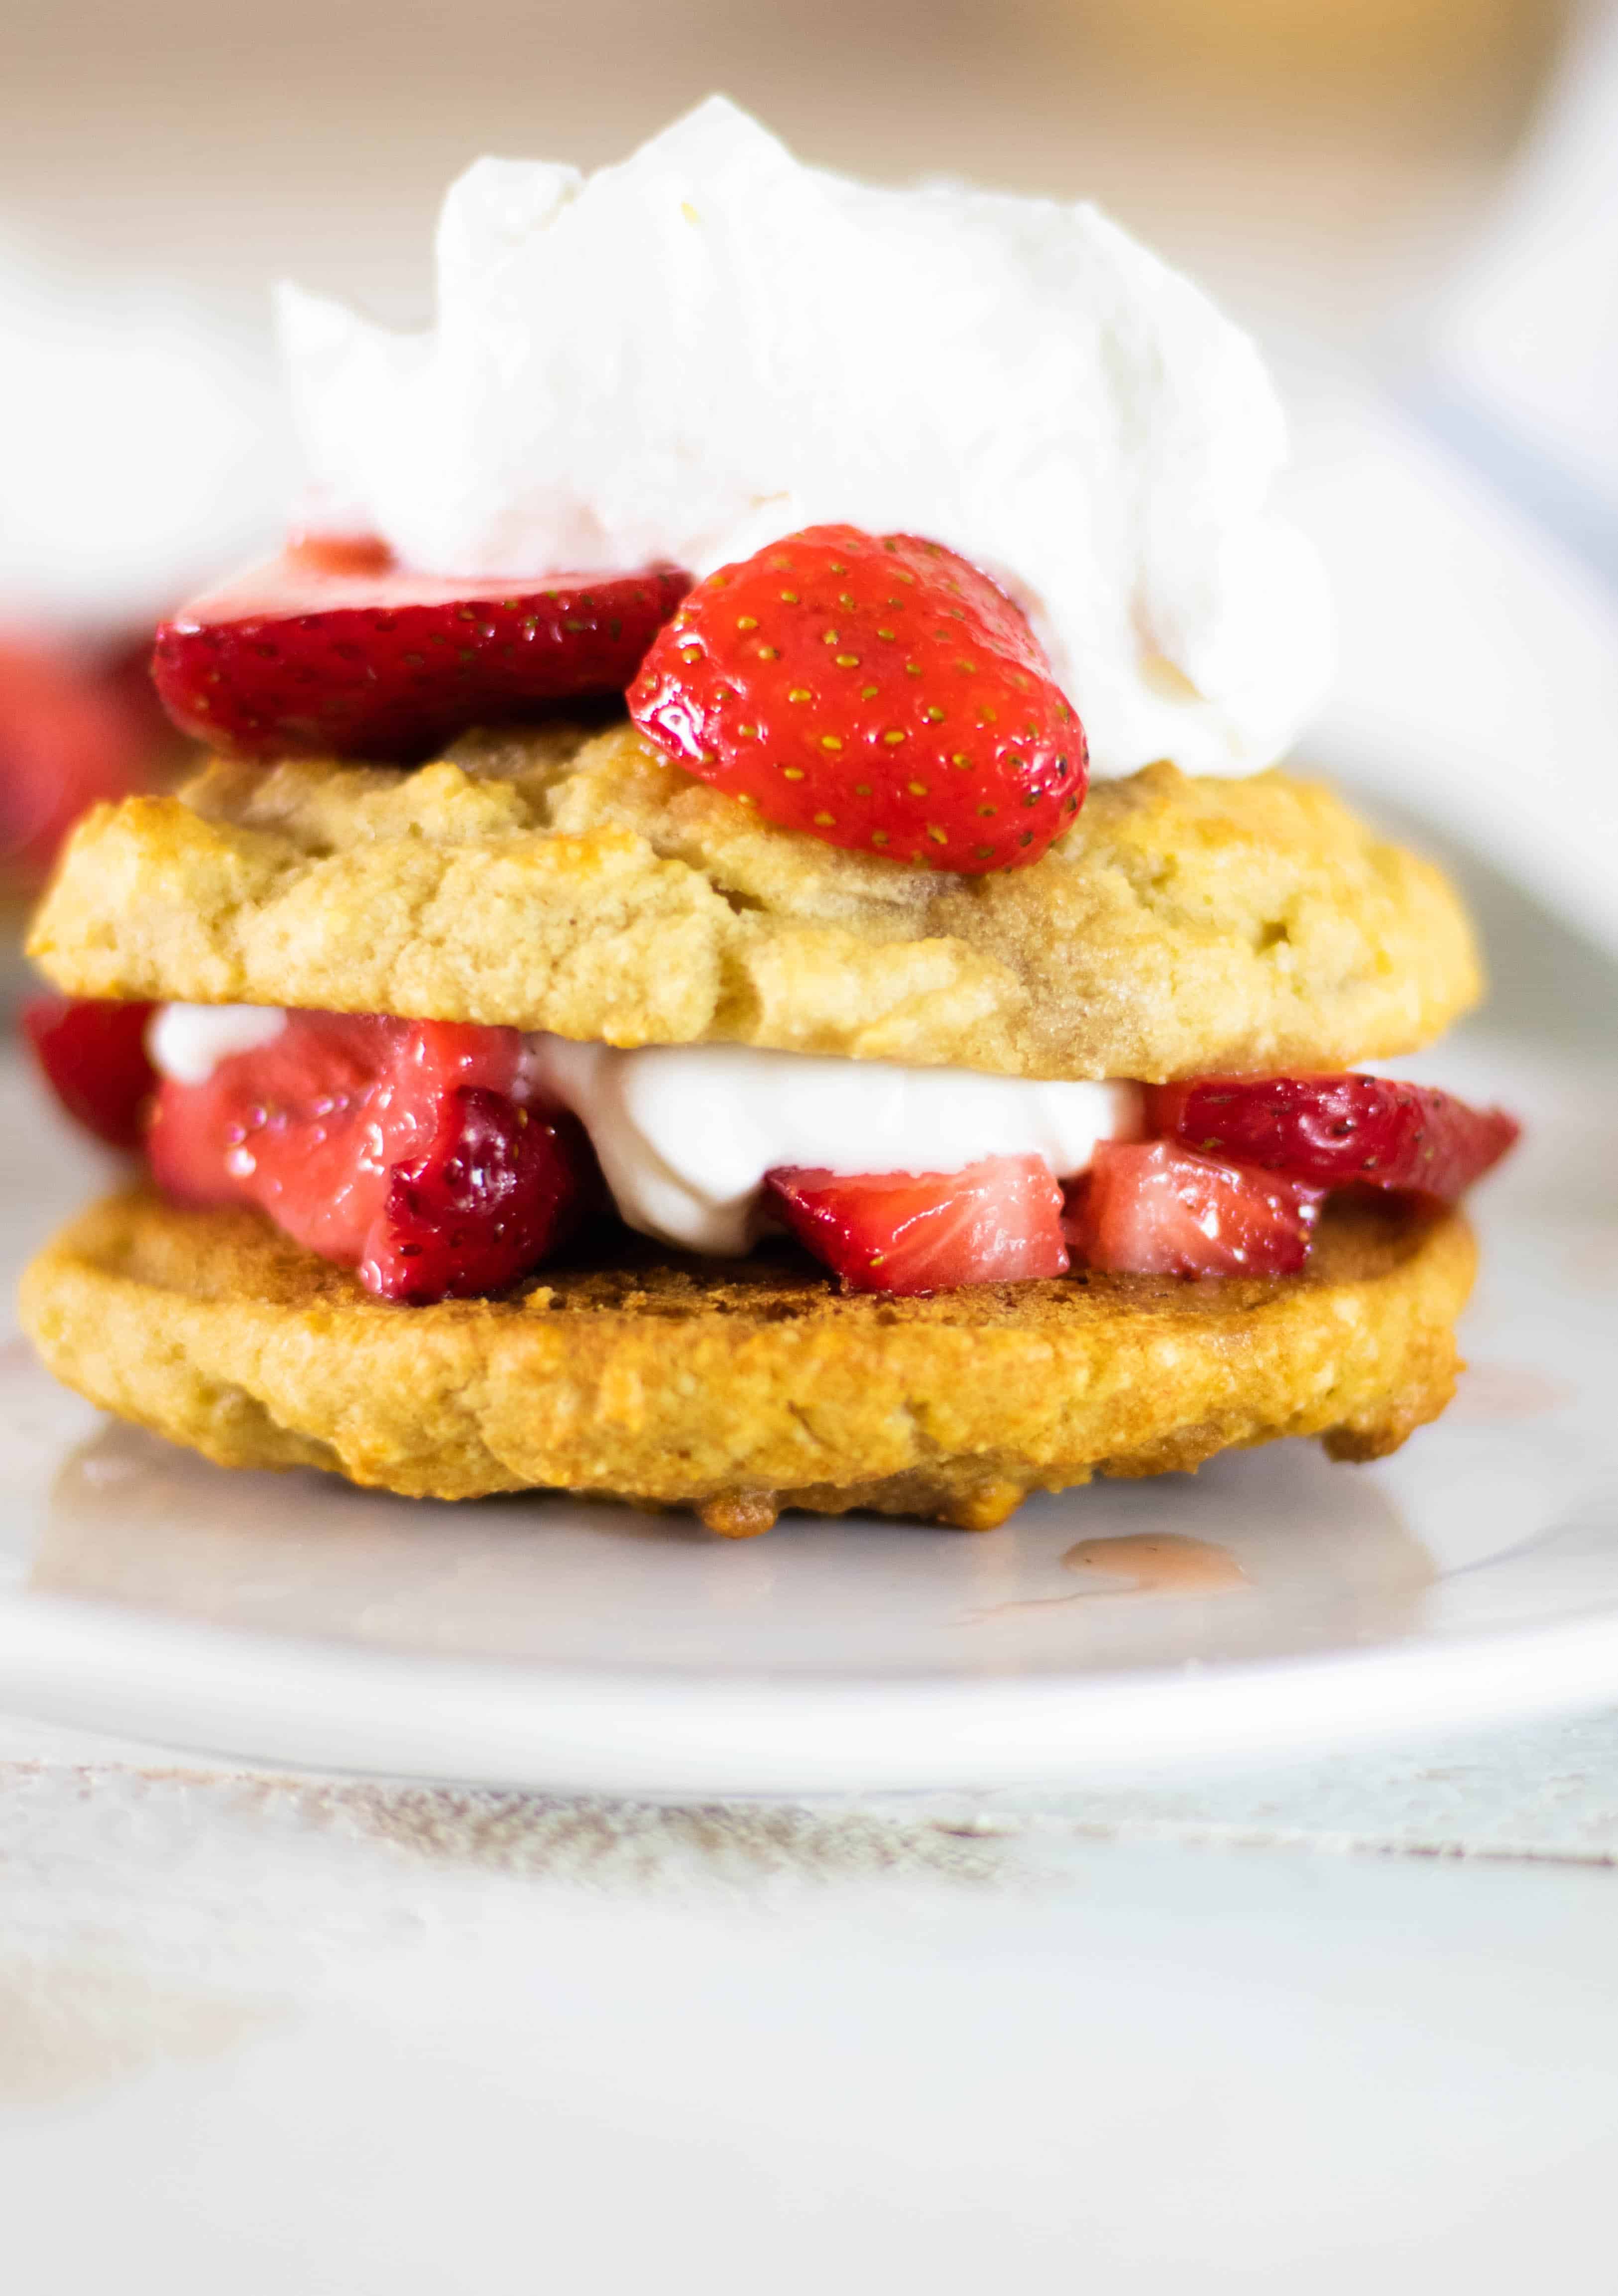 Gluten-free strawberry shortcake with whipped cream and strawberries.